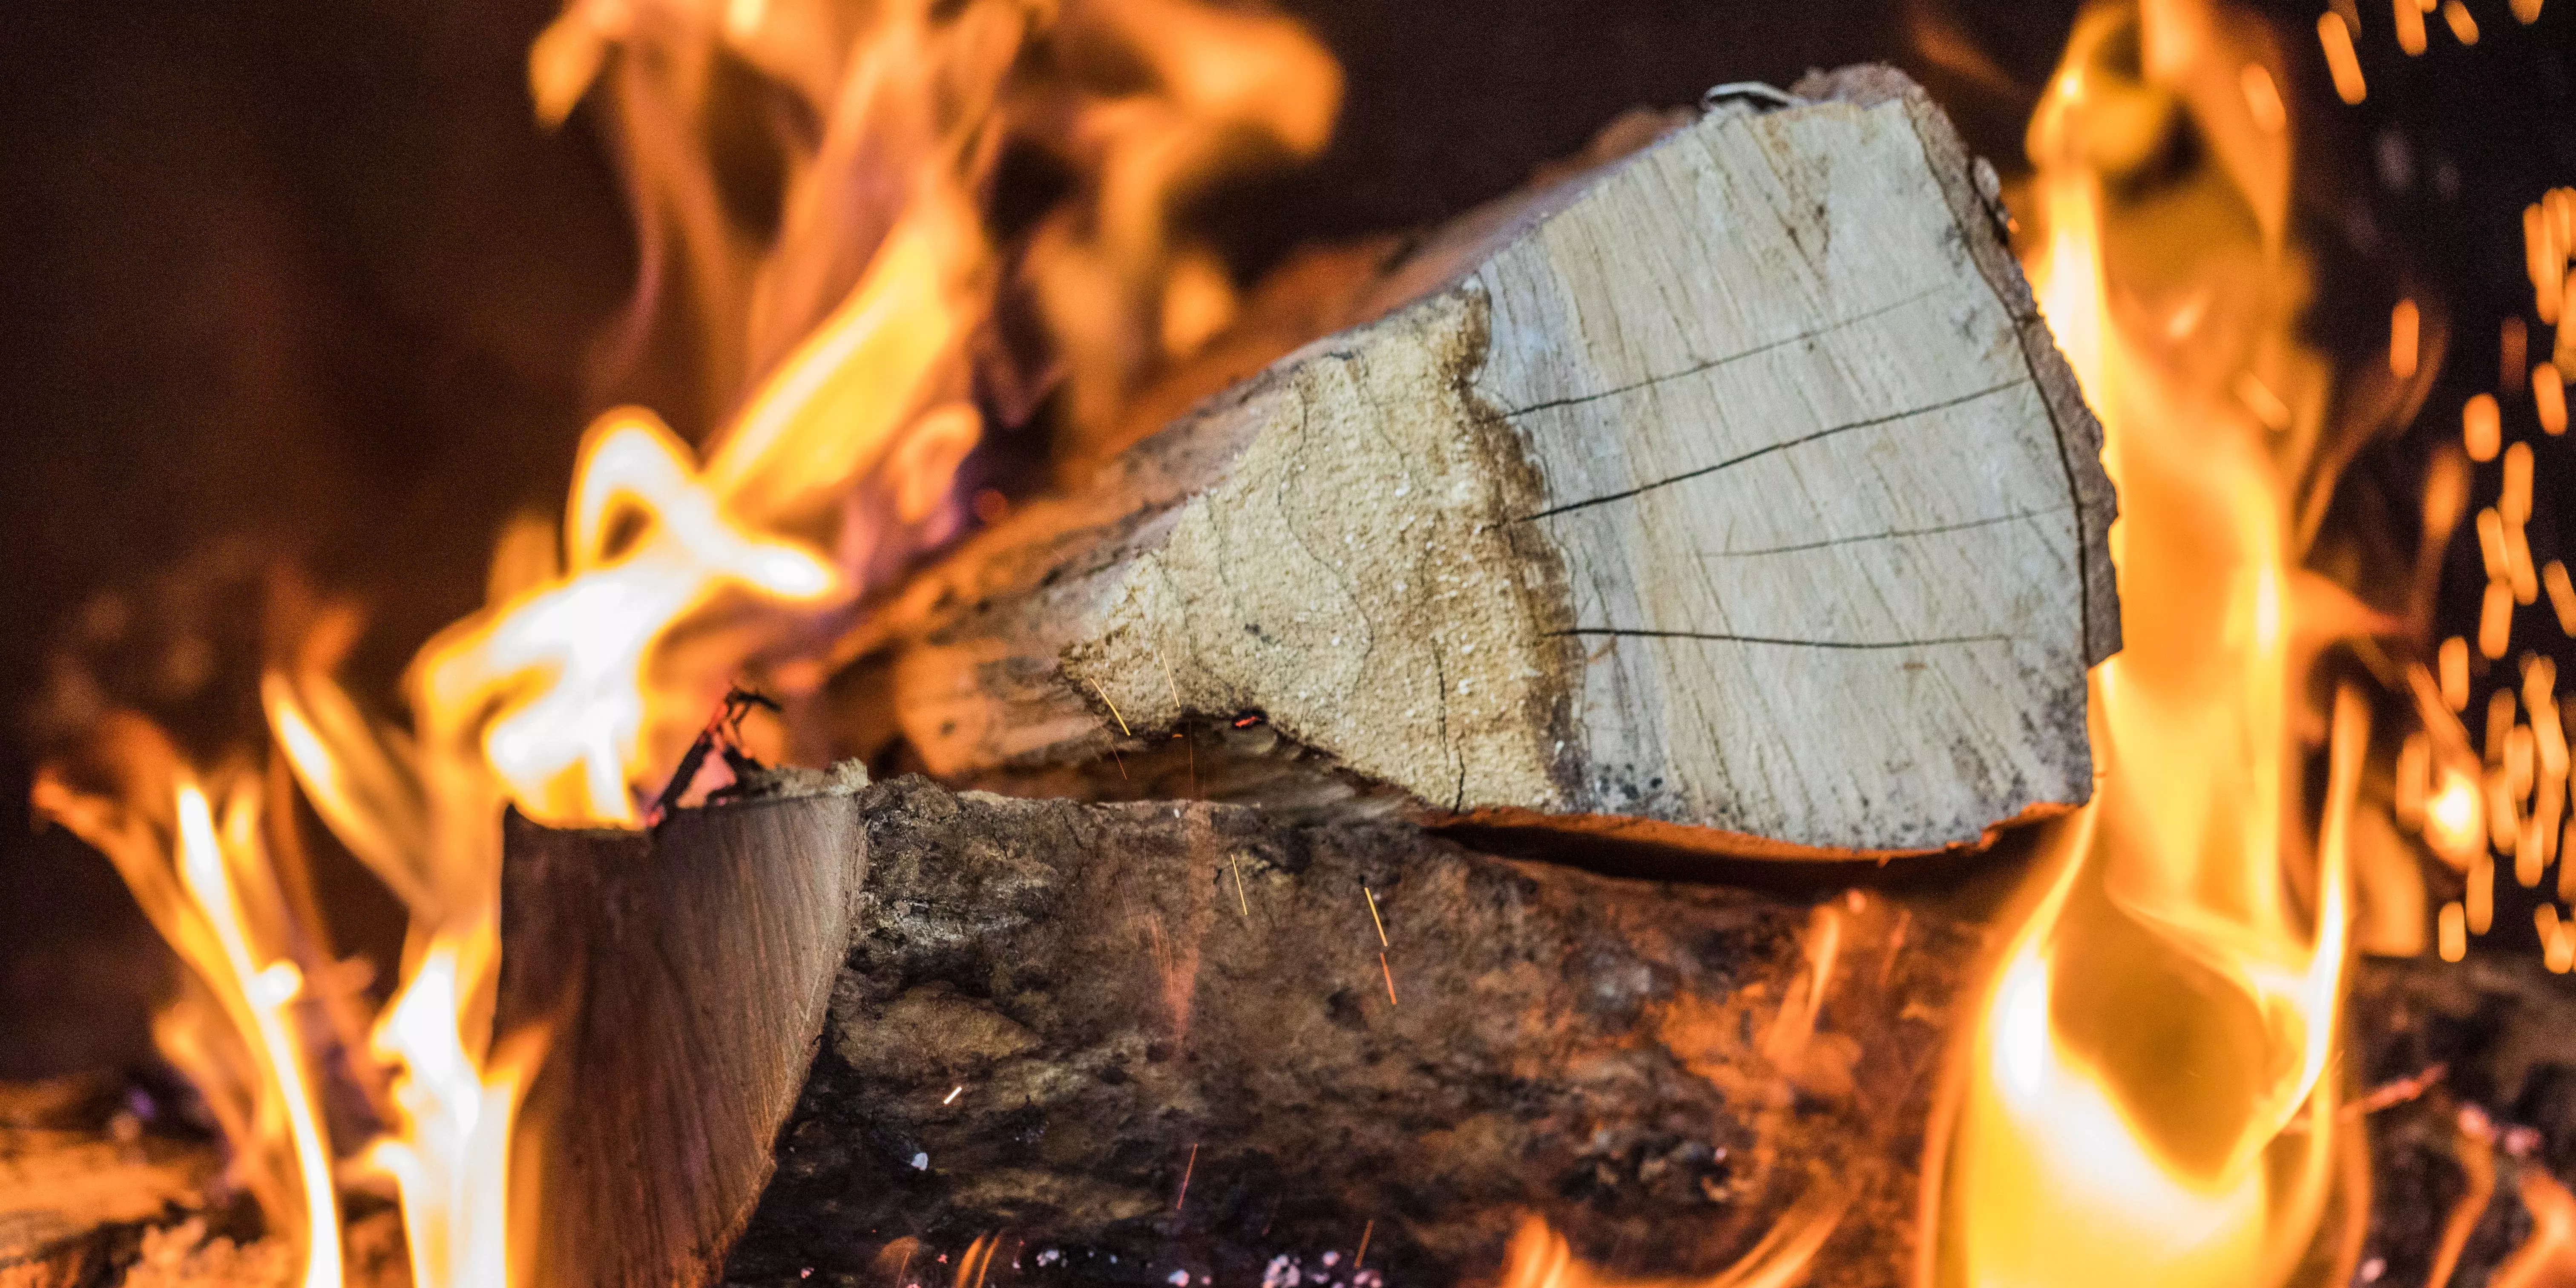 ‘Firewood is the new gold’ – prices and thefts rise in Europe as Russian gas cut boosts wood demand ahead of winter